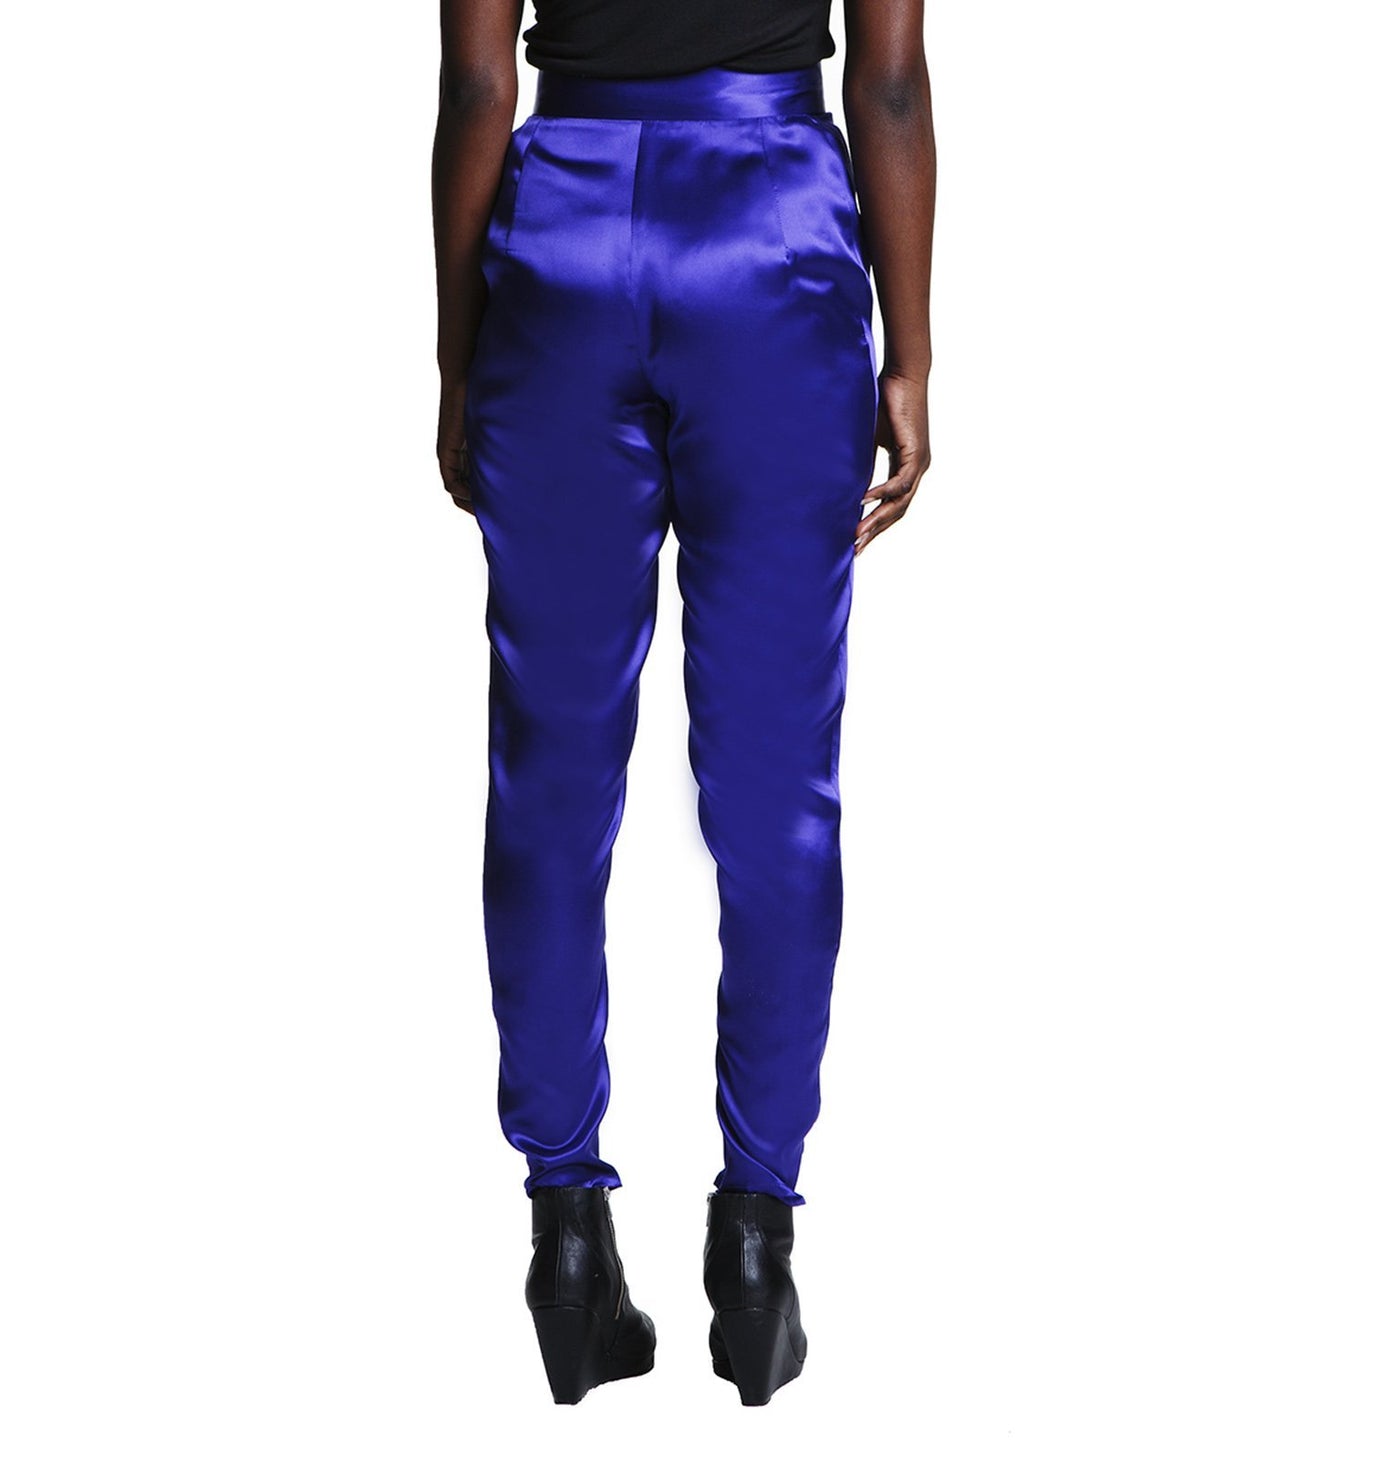 Ophelia Trousers - The Clothing LoungeTramp in Disguise